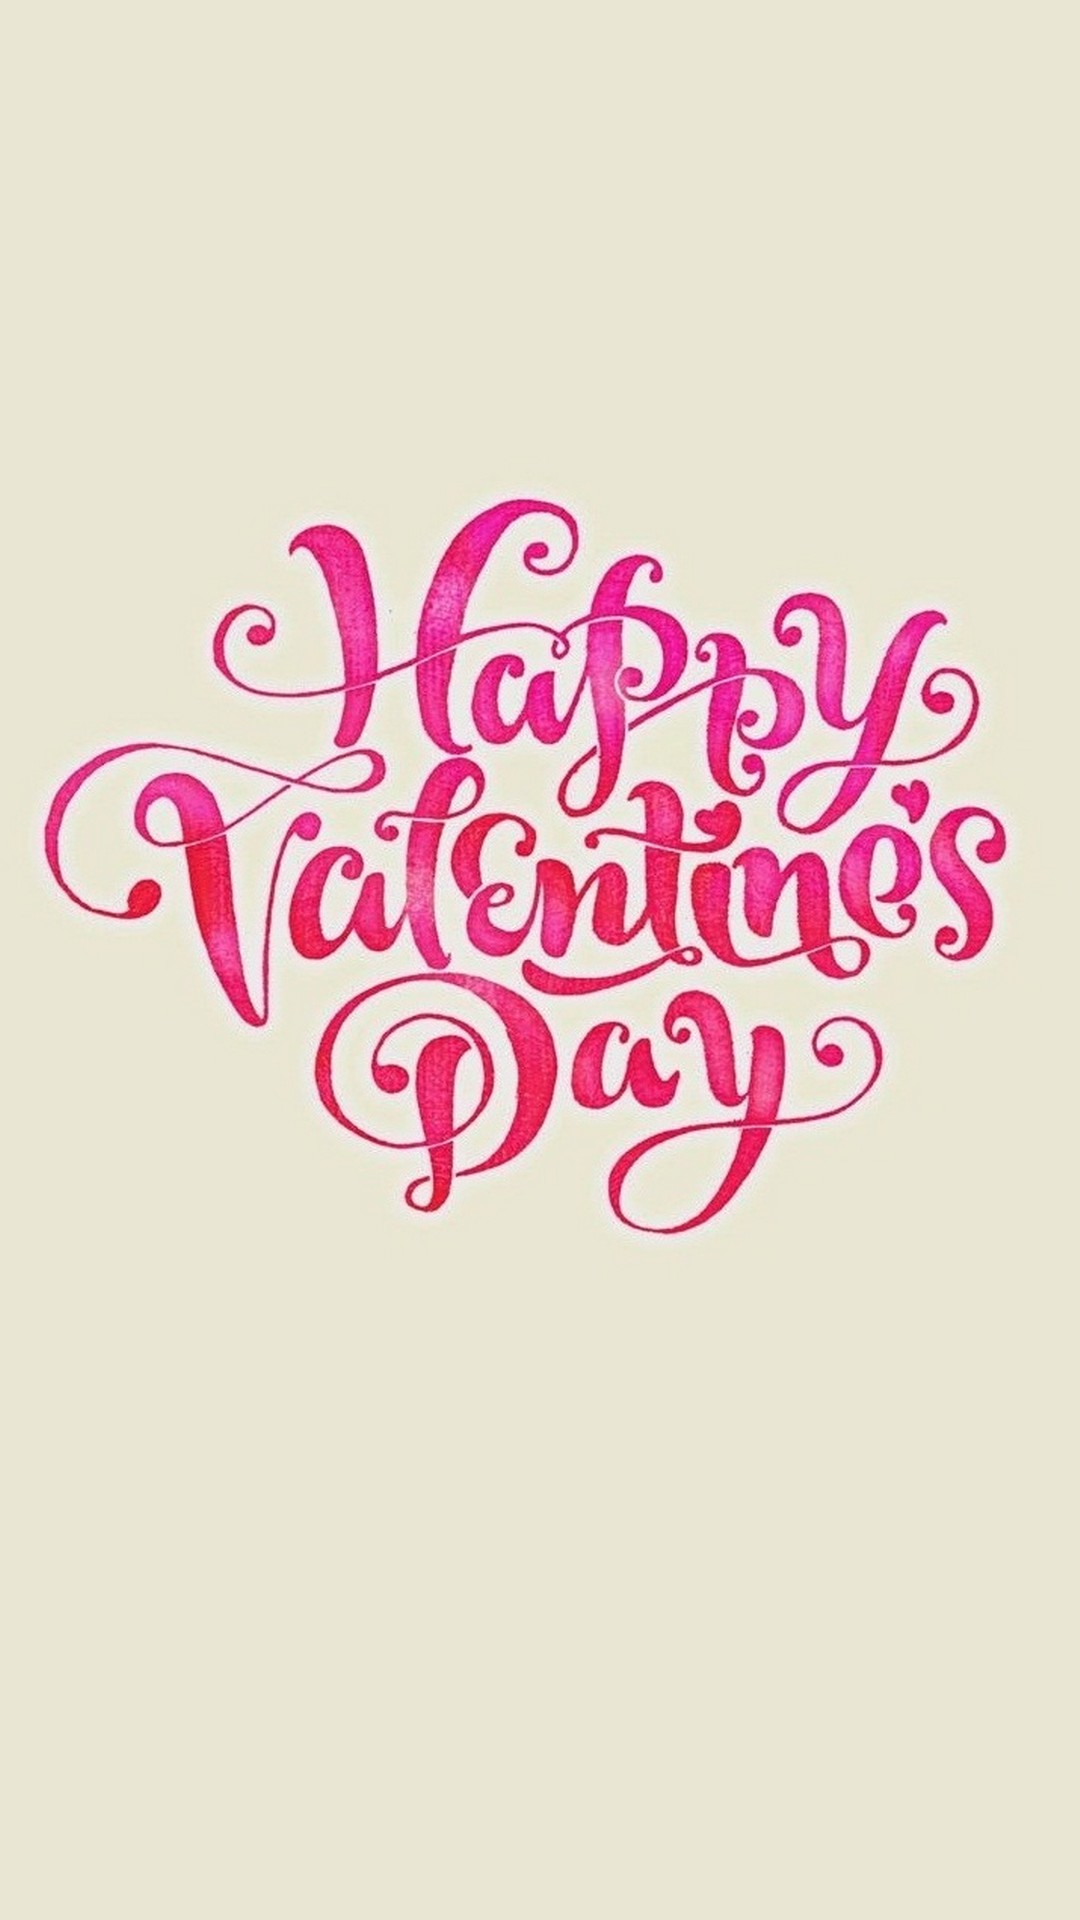 Android Wallpaper Happy Valentines Day Images